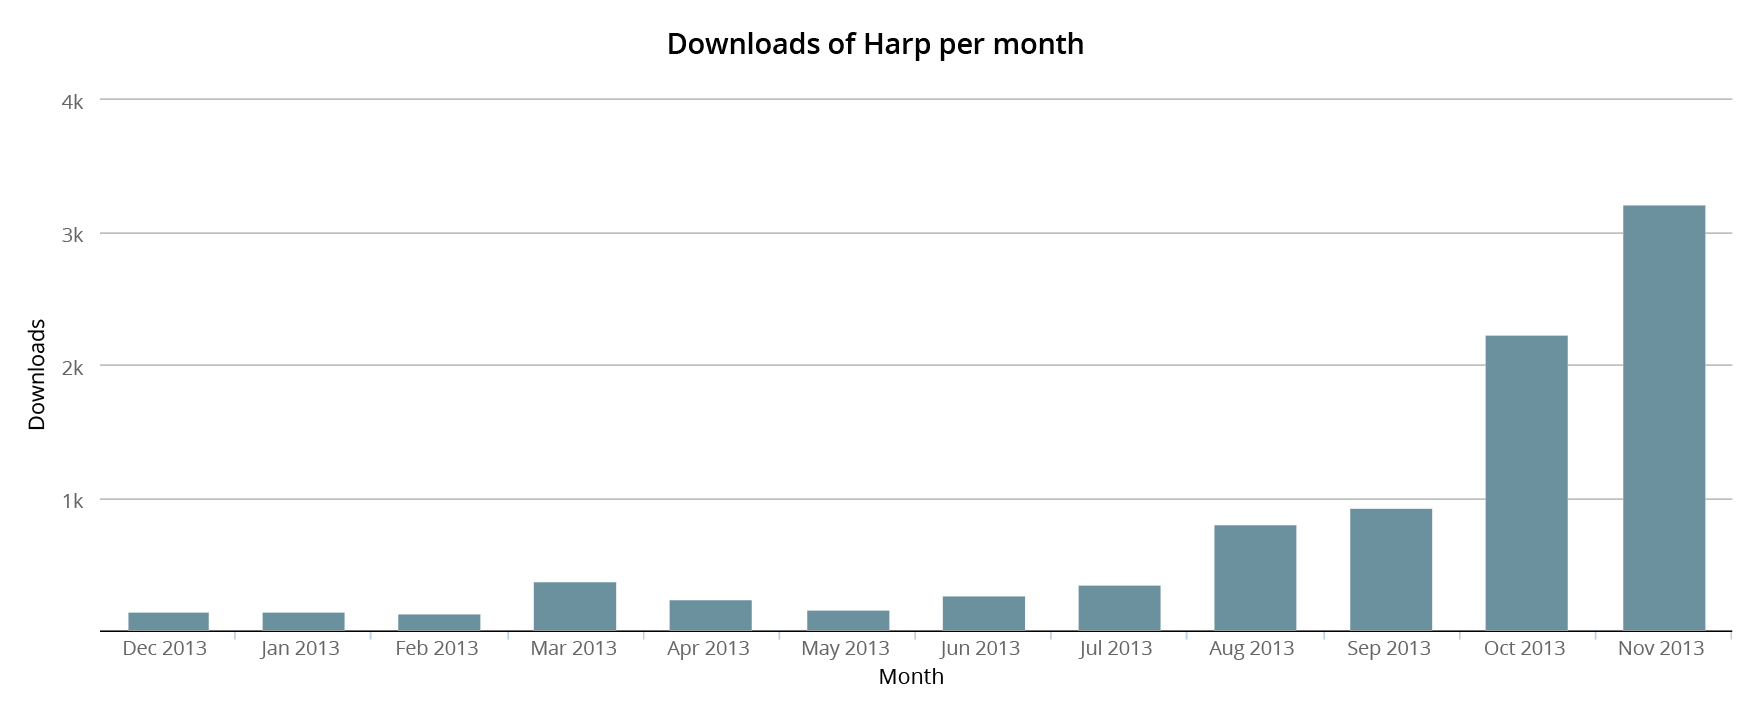 A bar graph that shows the number of times Harp has been downloaded per month.